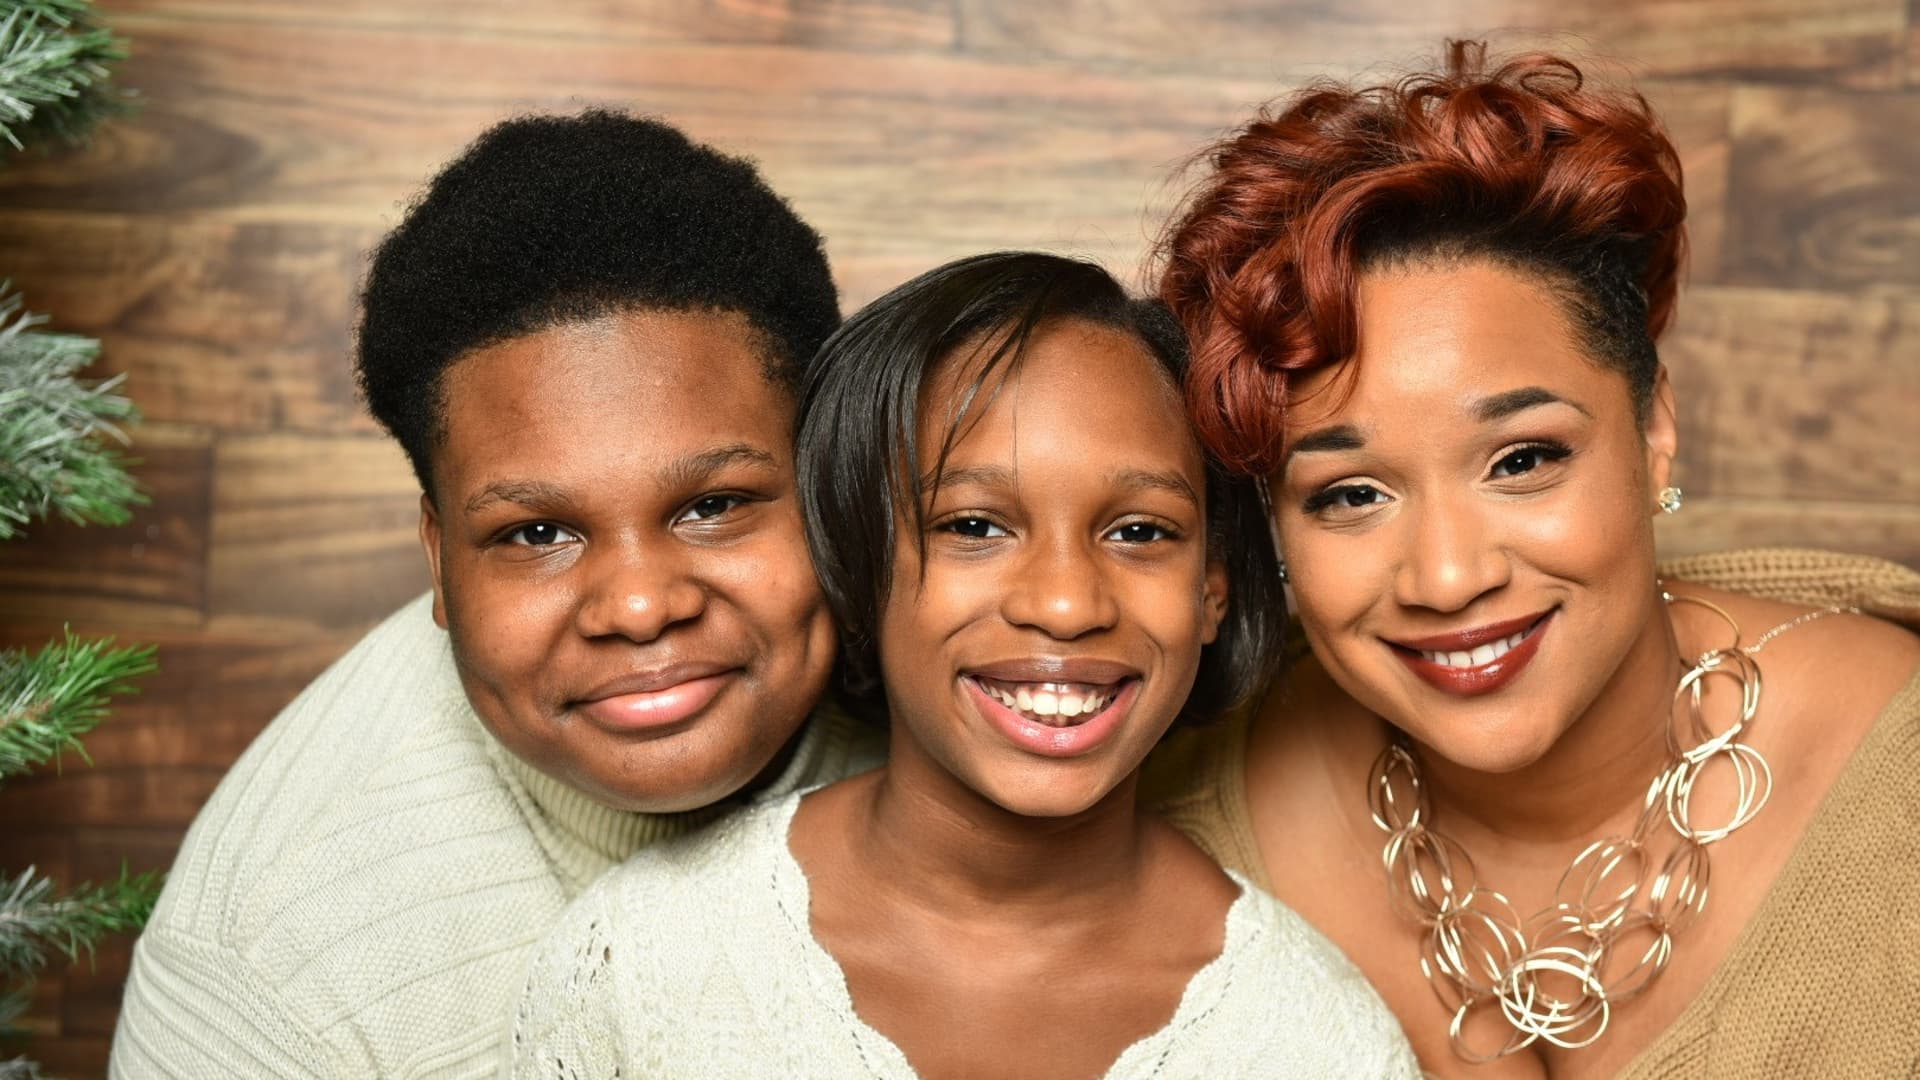 April Franklin, 35, vowed to raise her children without the financial instability that plagued her own childhood.